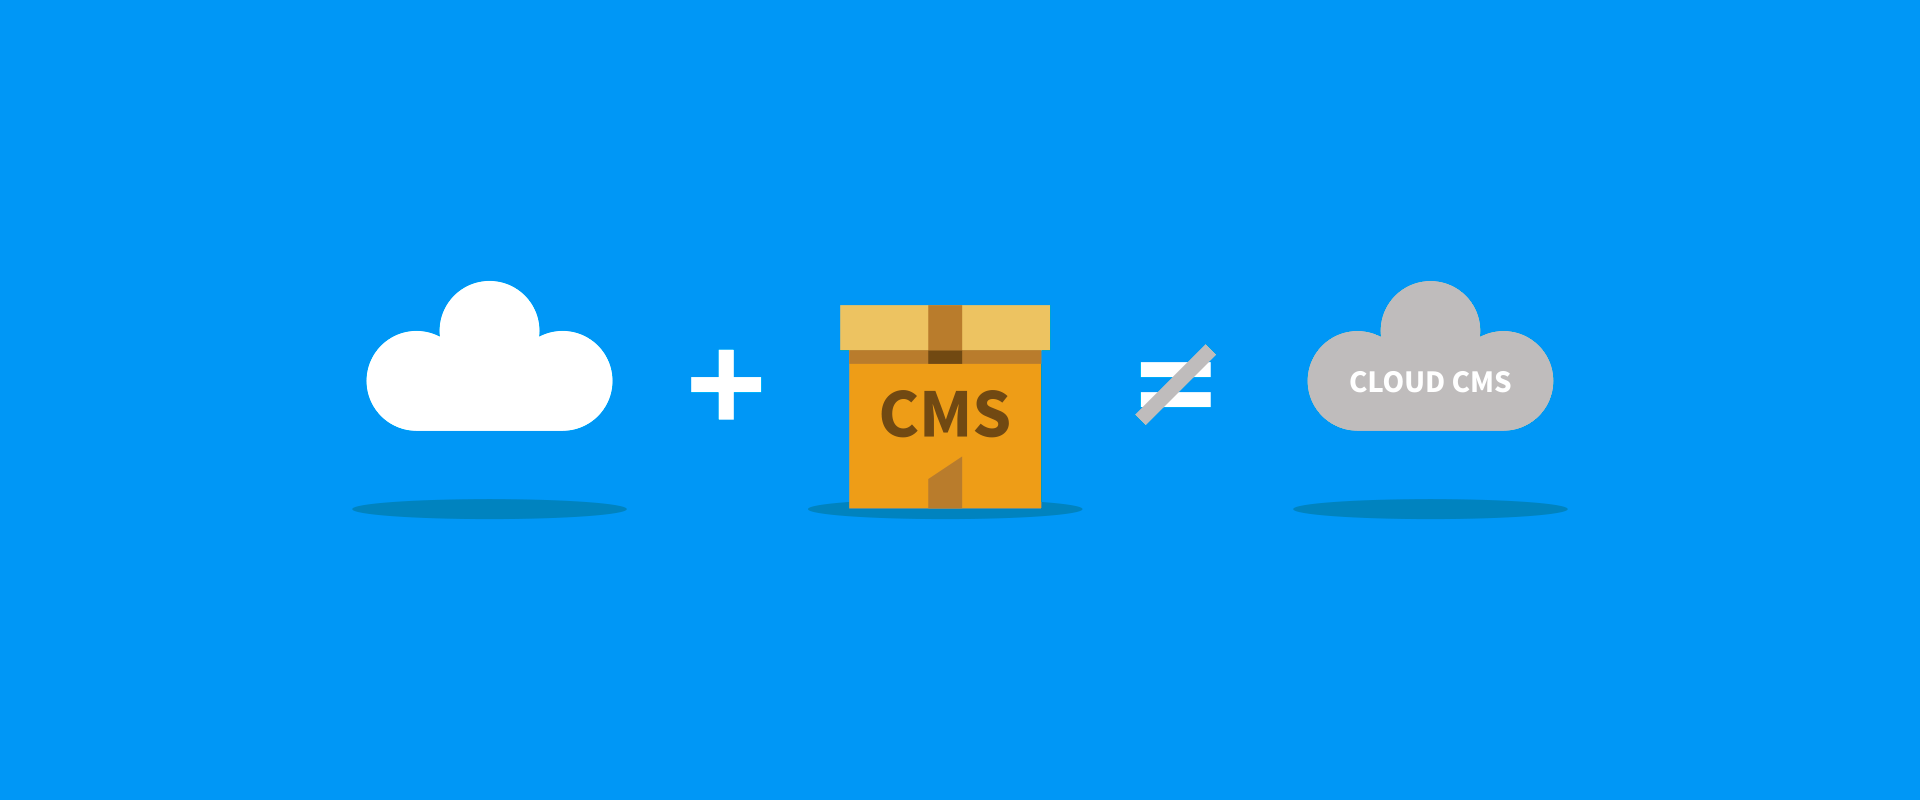 It's time for a cloud-first headless CMS